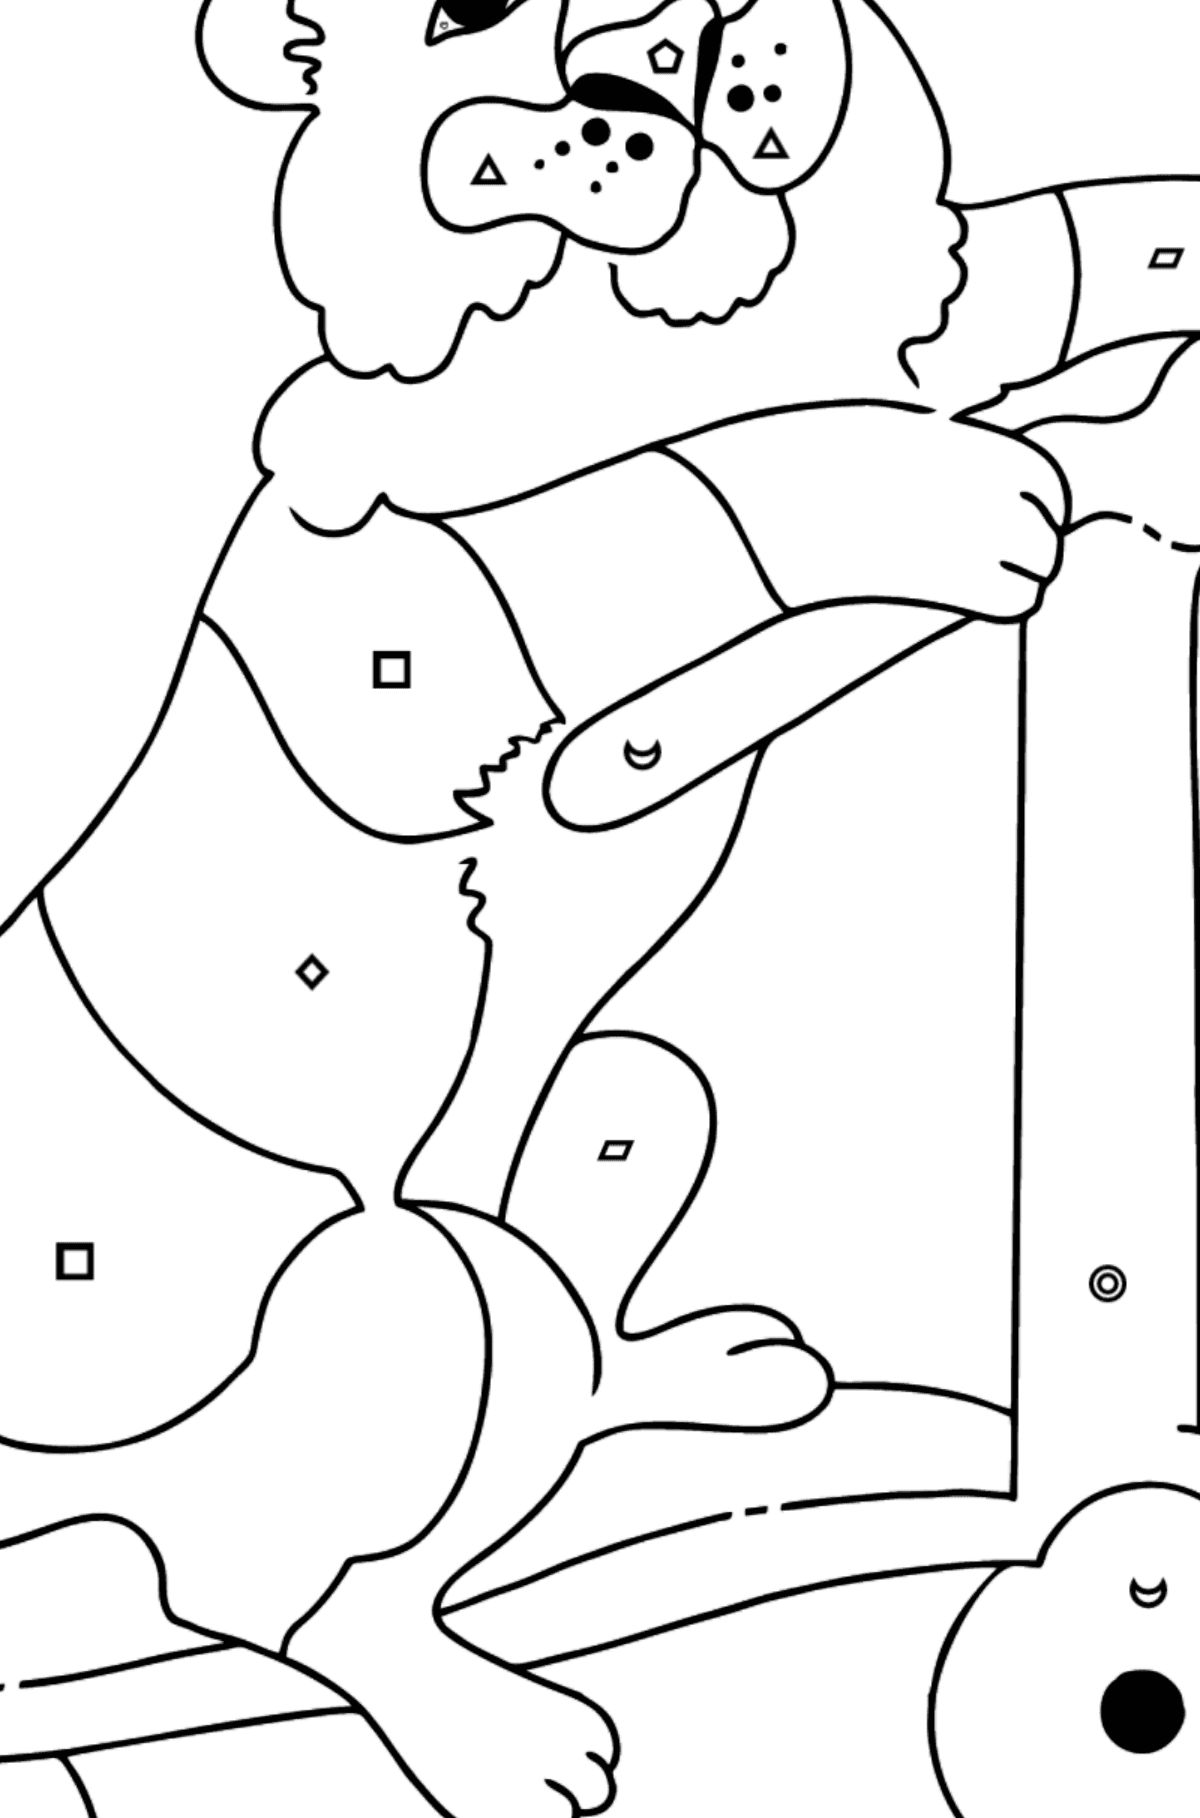 Coloring Page - A Tiger is Learning to Ride a Scooter - Coloring by Geometric Shapes for Kids